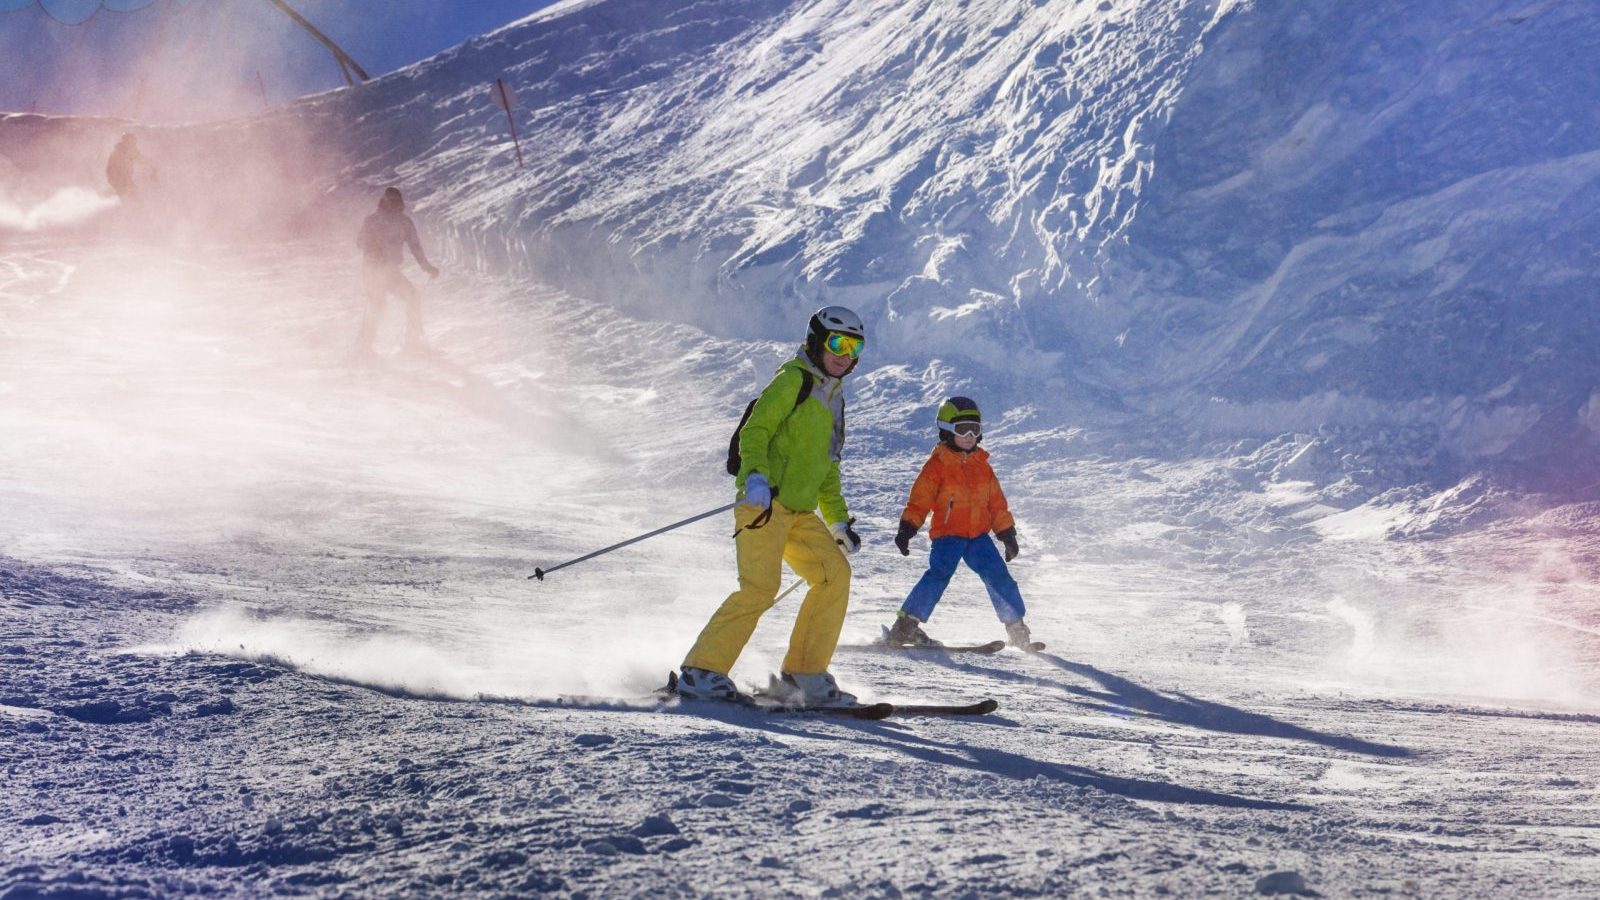 Skiing and Freeriding at Monte Rosa: An Alpine Adventure for Families